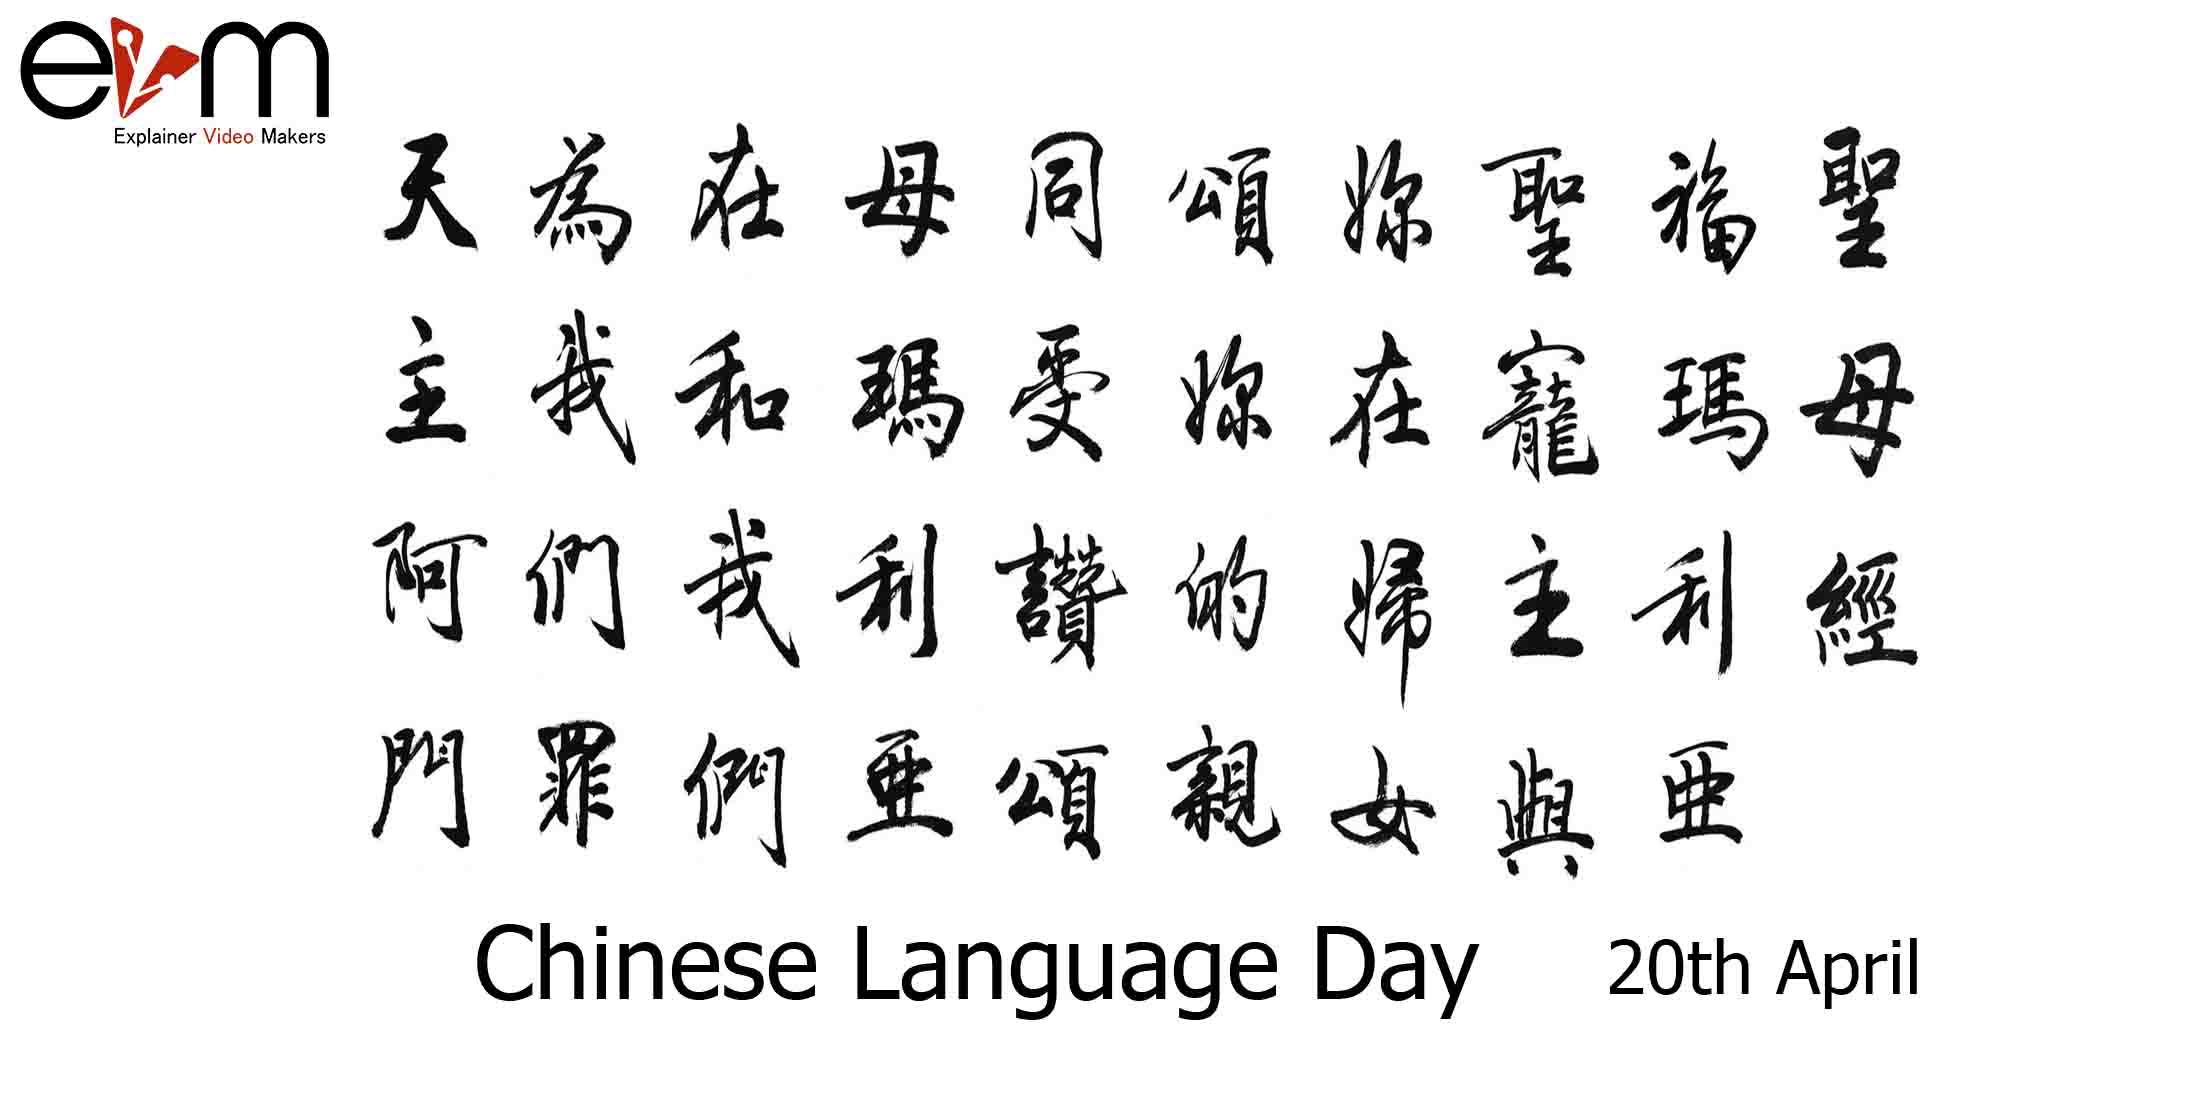 Chinese Language Day explainer video makers